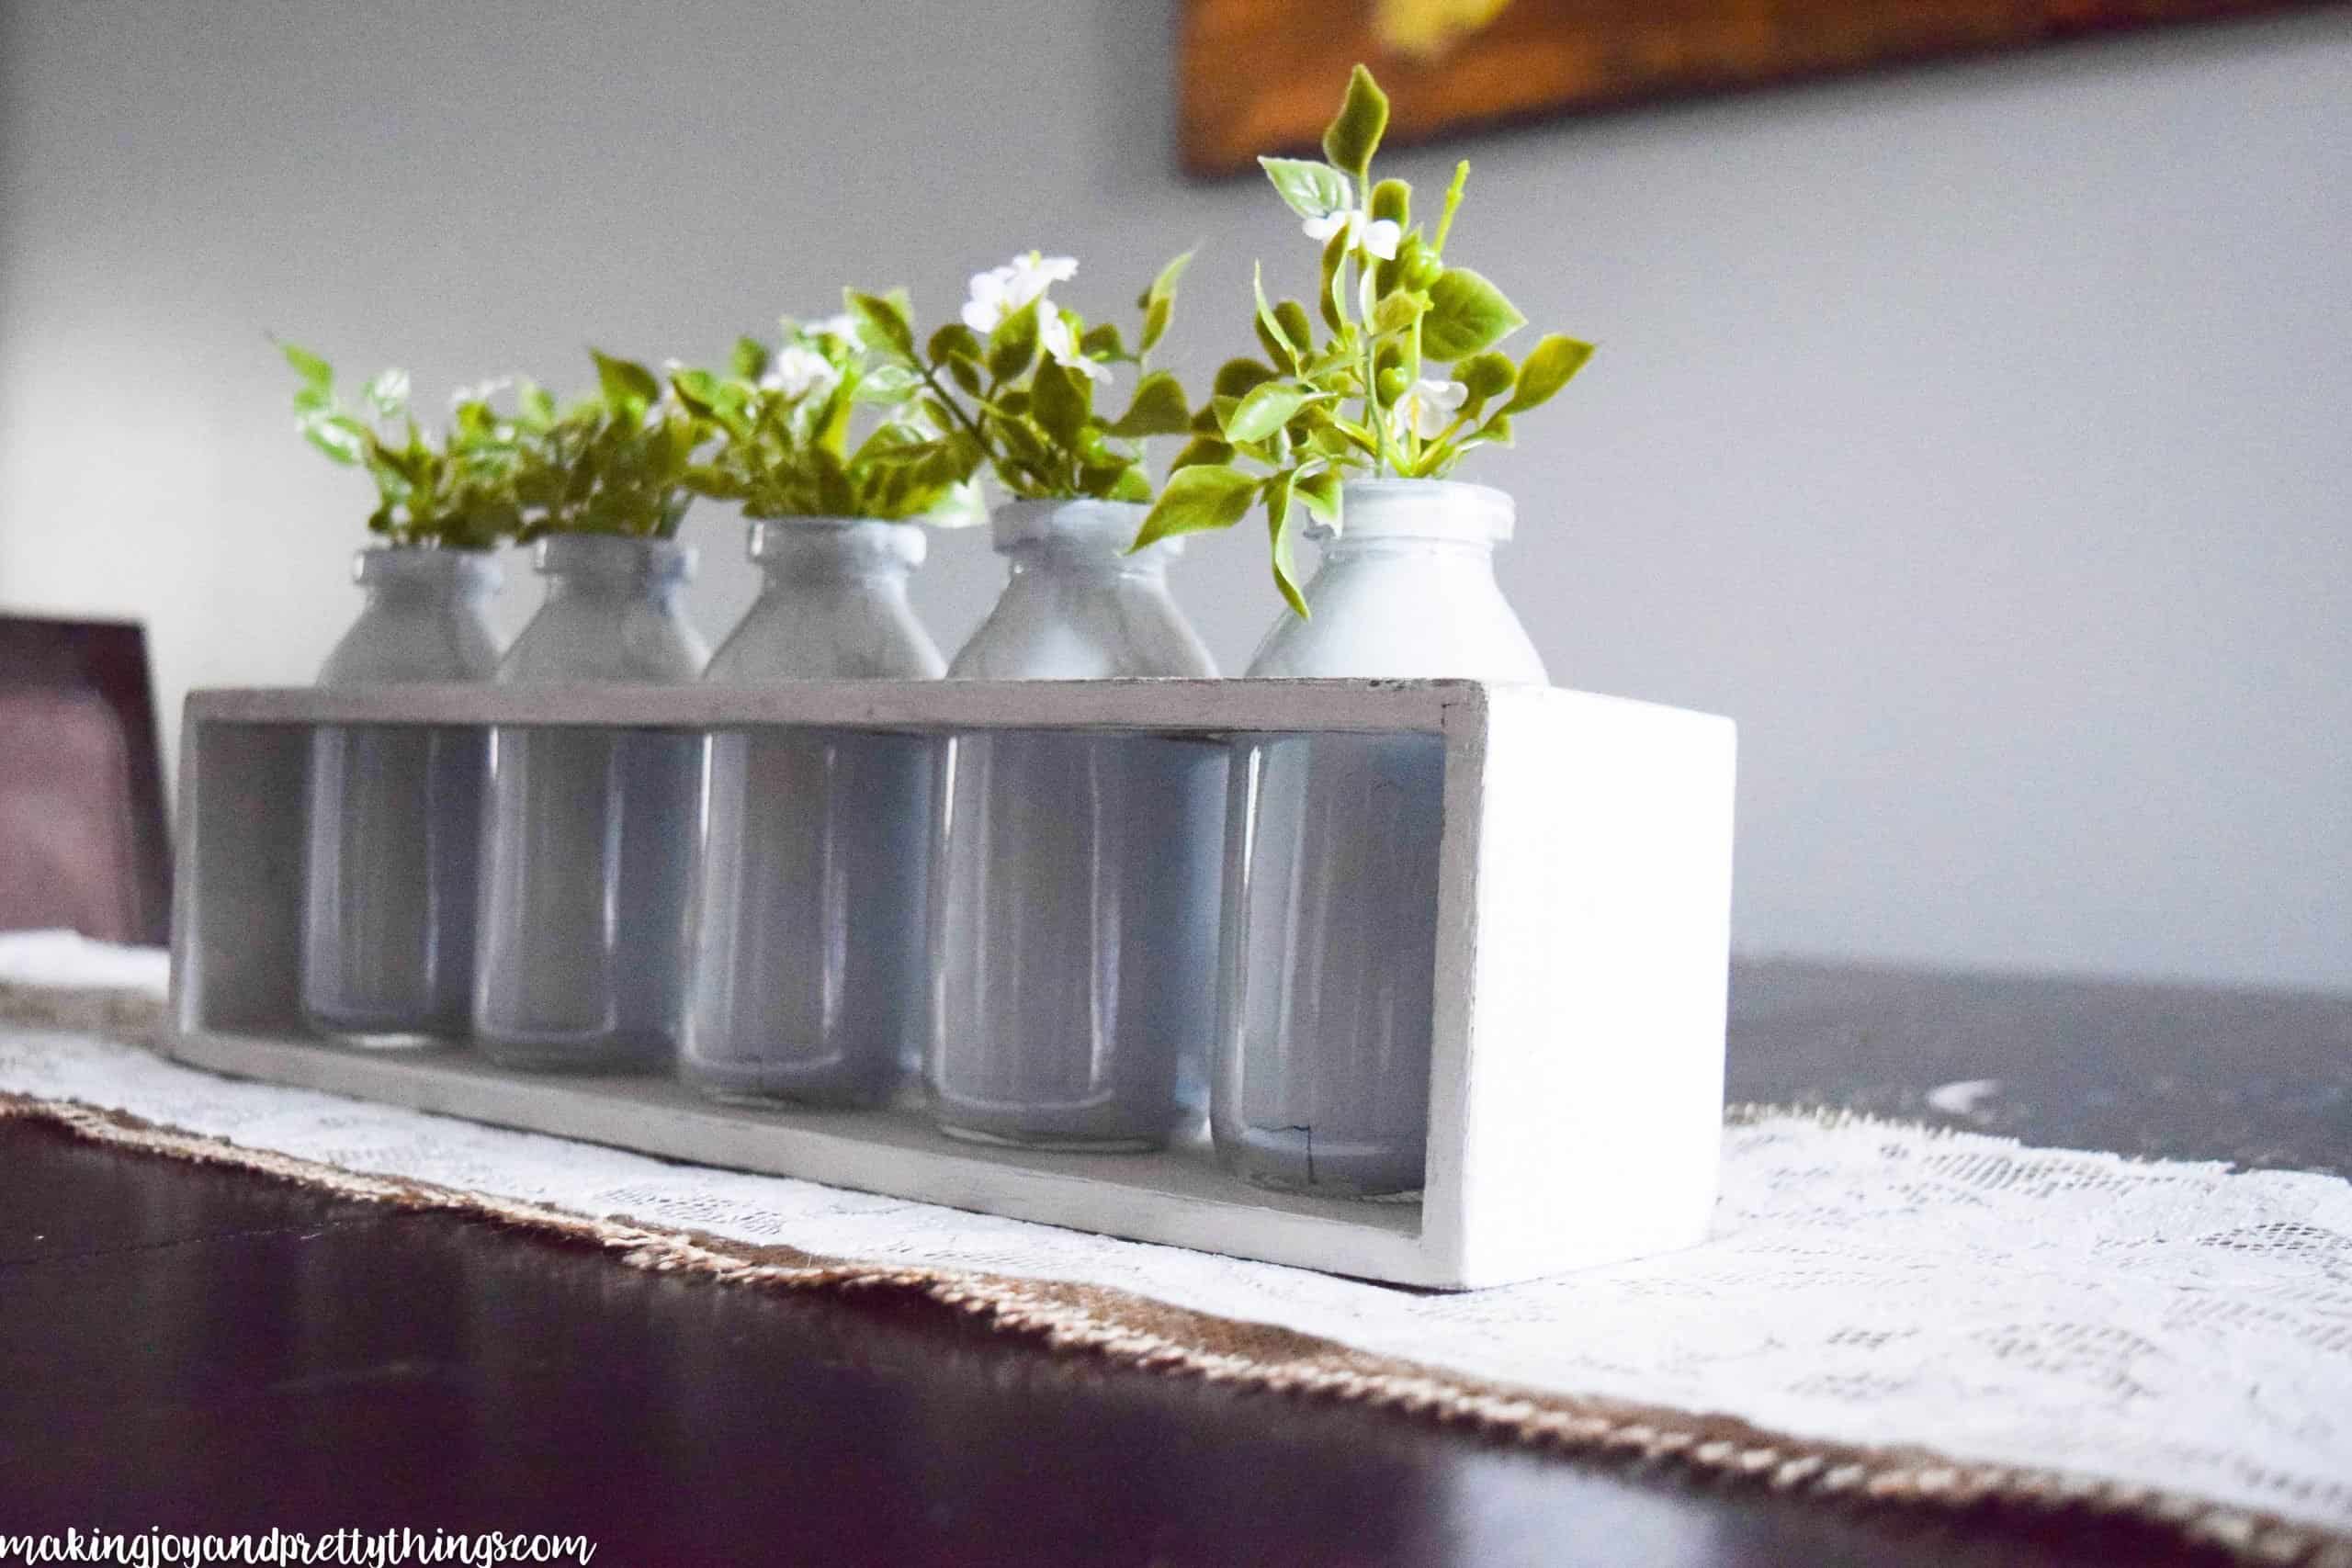 Glass milk jars are lined up in a white-painted wood box. The jars have faux greenery sprigs sticking out from the top.